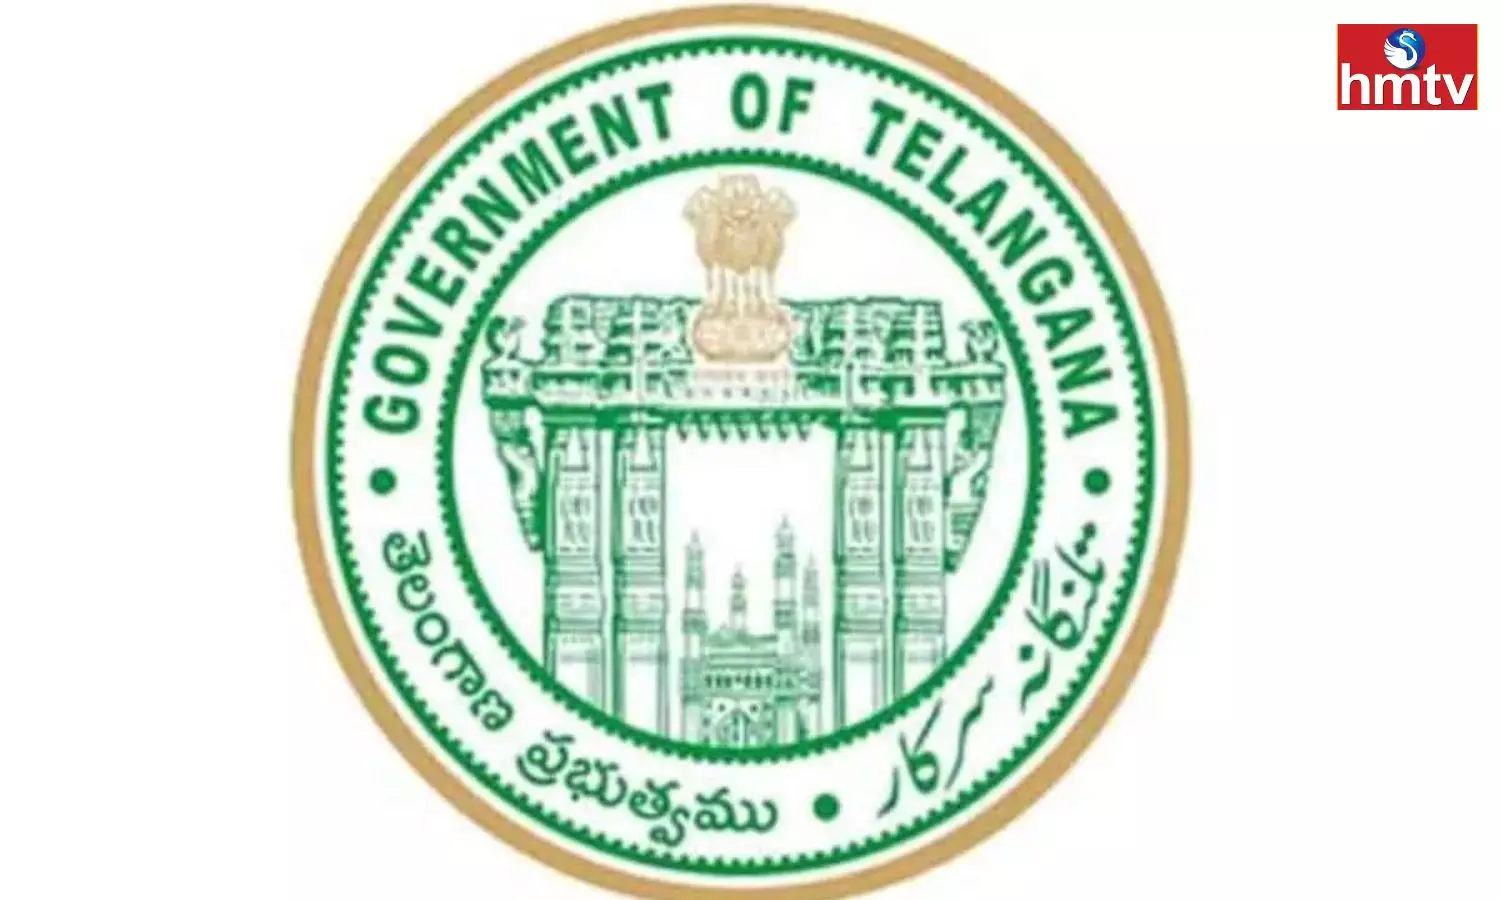 Department Wise Daily Reviews On Telangana budget